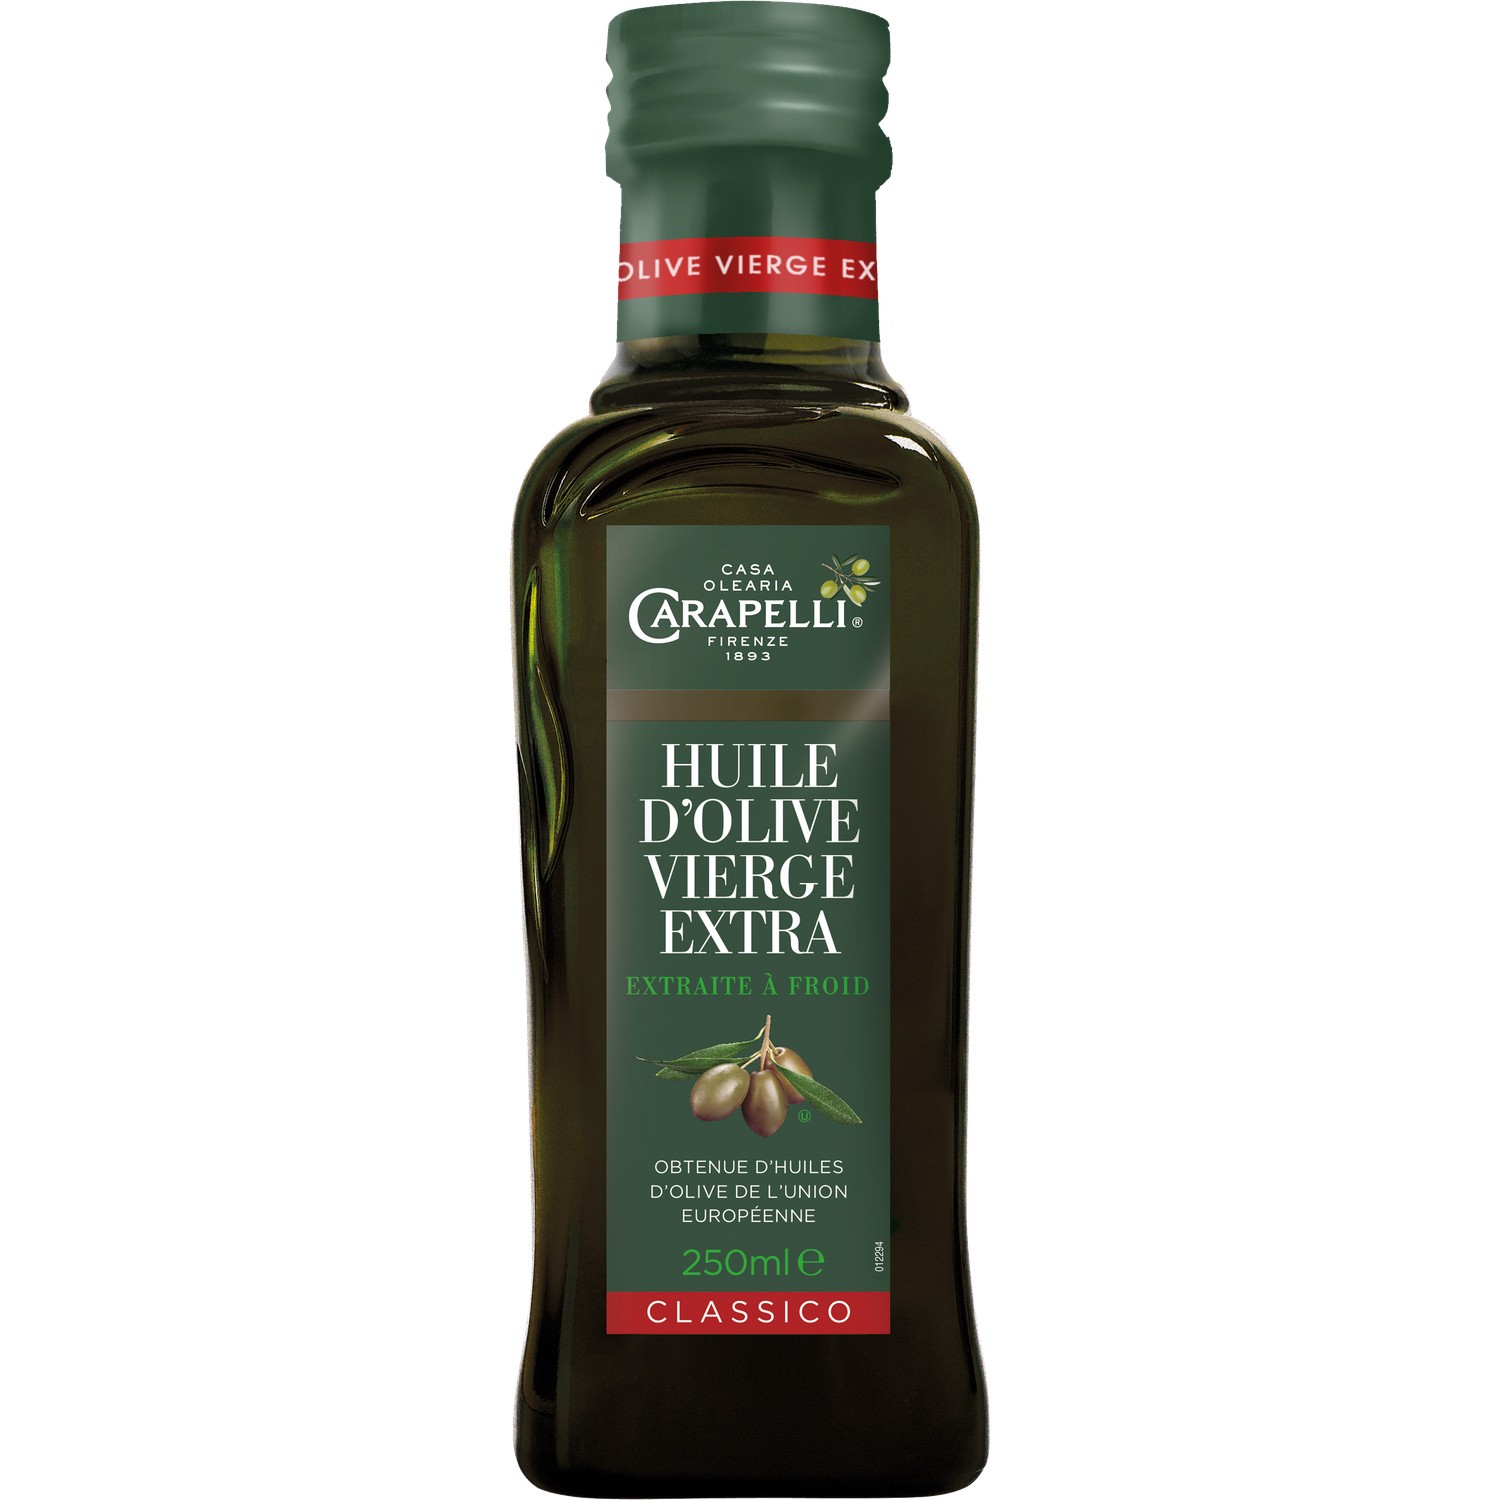 Huile d'olive vierge extra bidon 5L - CAUVIN